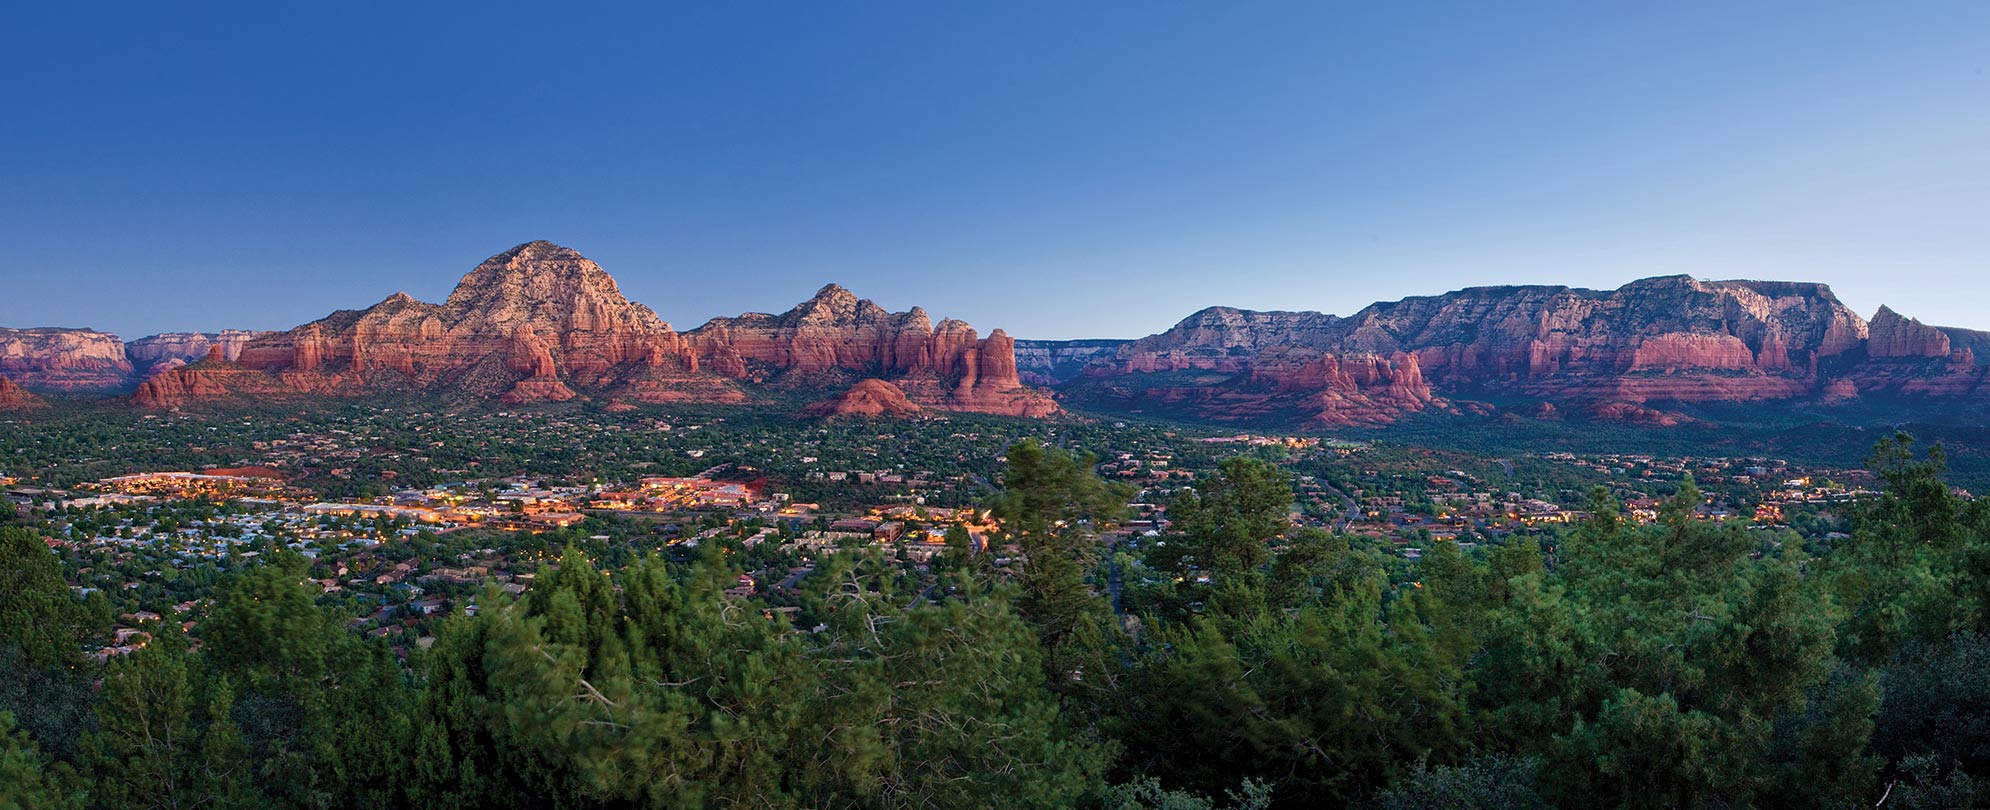 An aerial of Sedona, Arizona, and its surrounding red rock formations